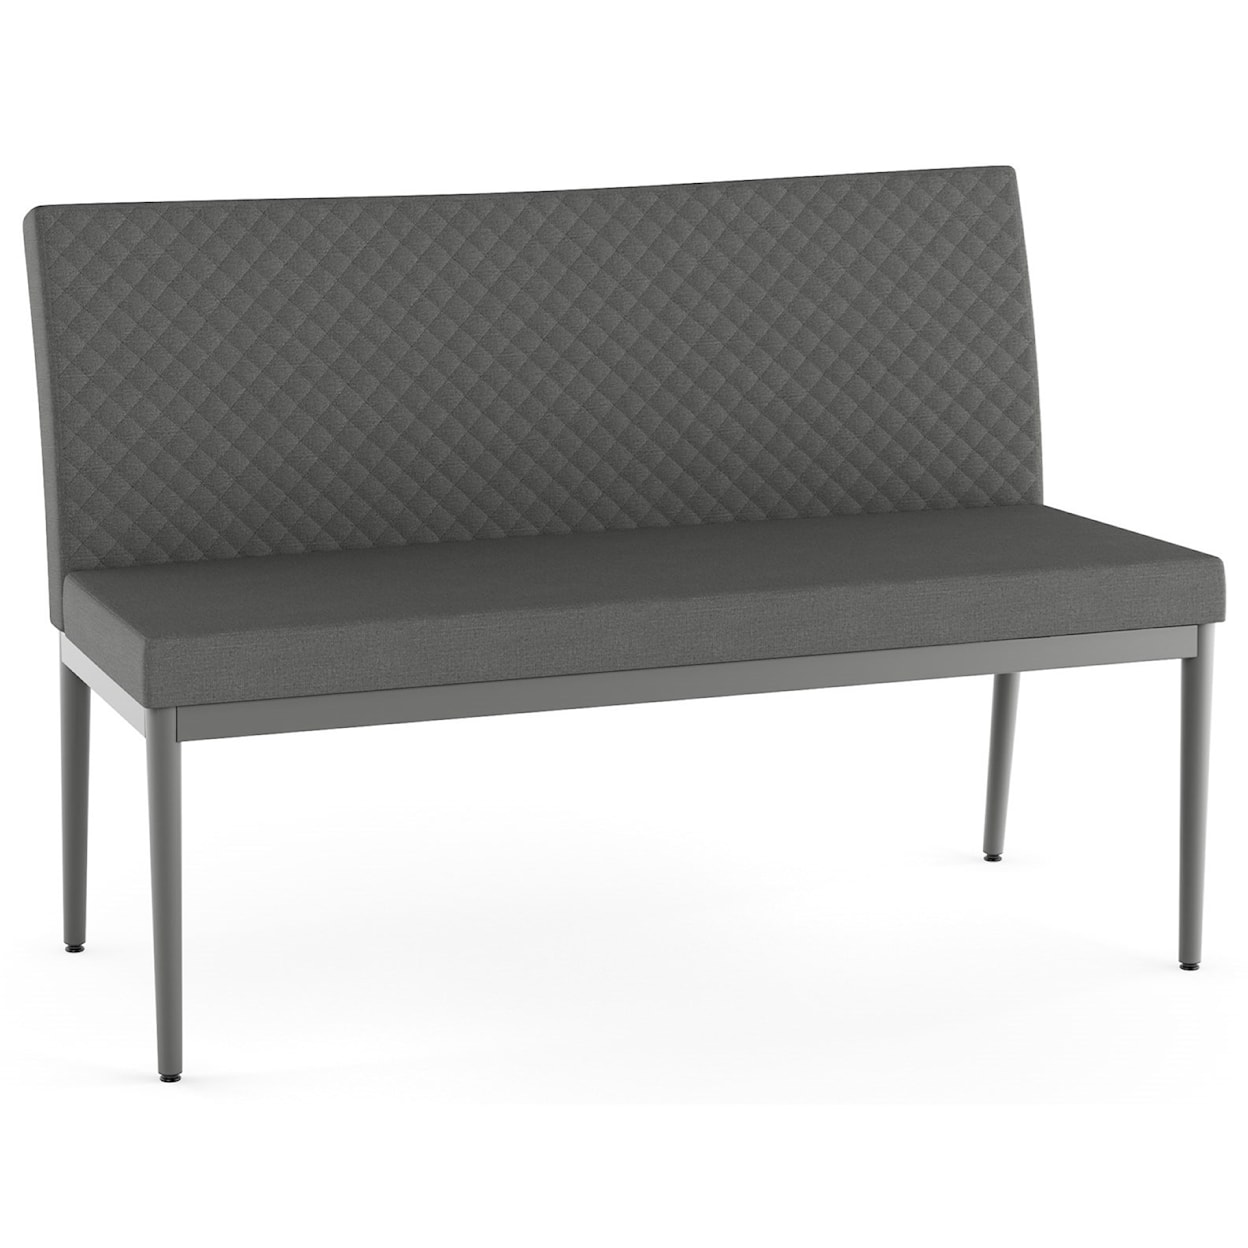 Amisco Urban Monroe Bench with Quilting